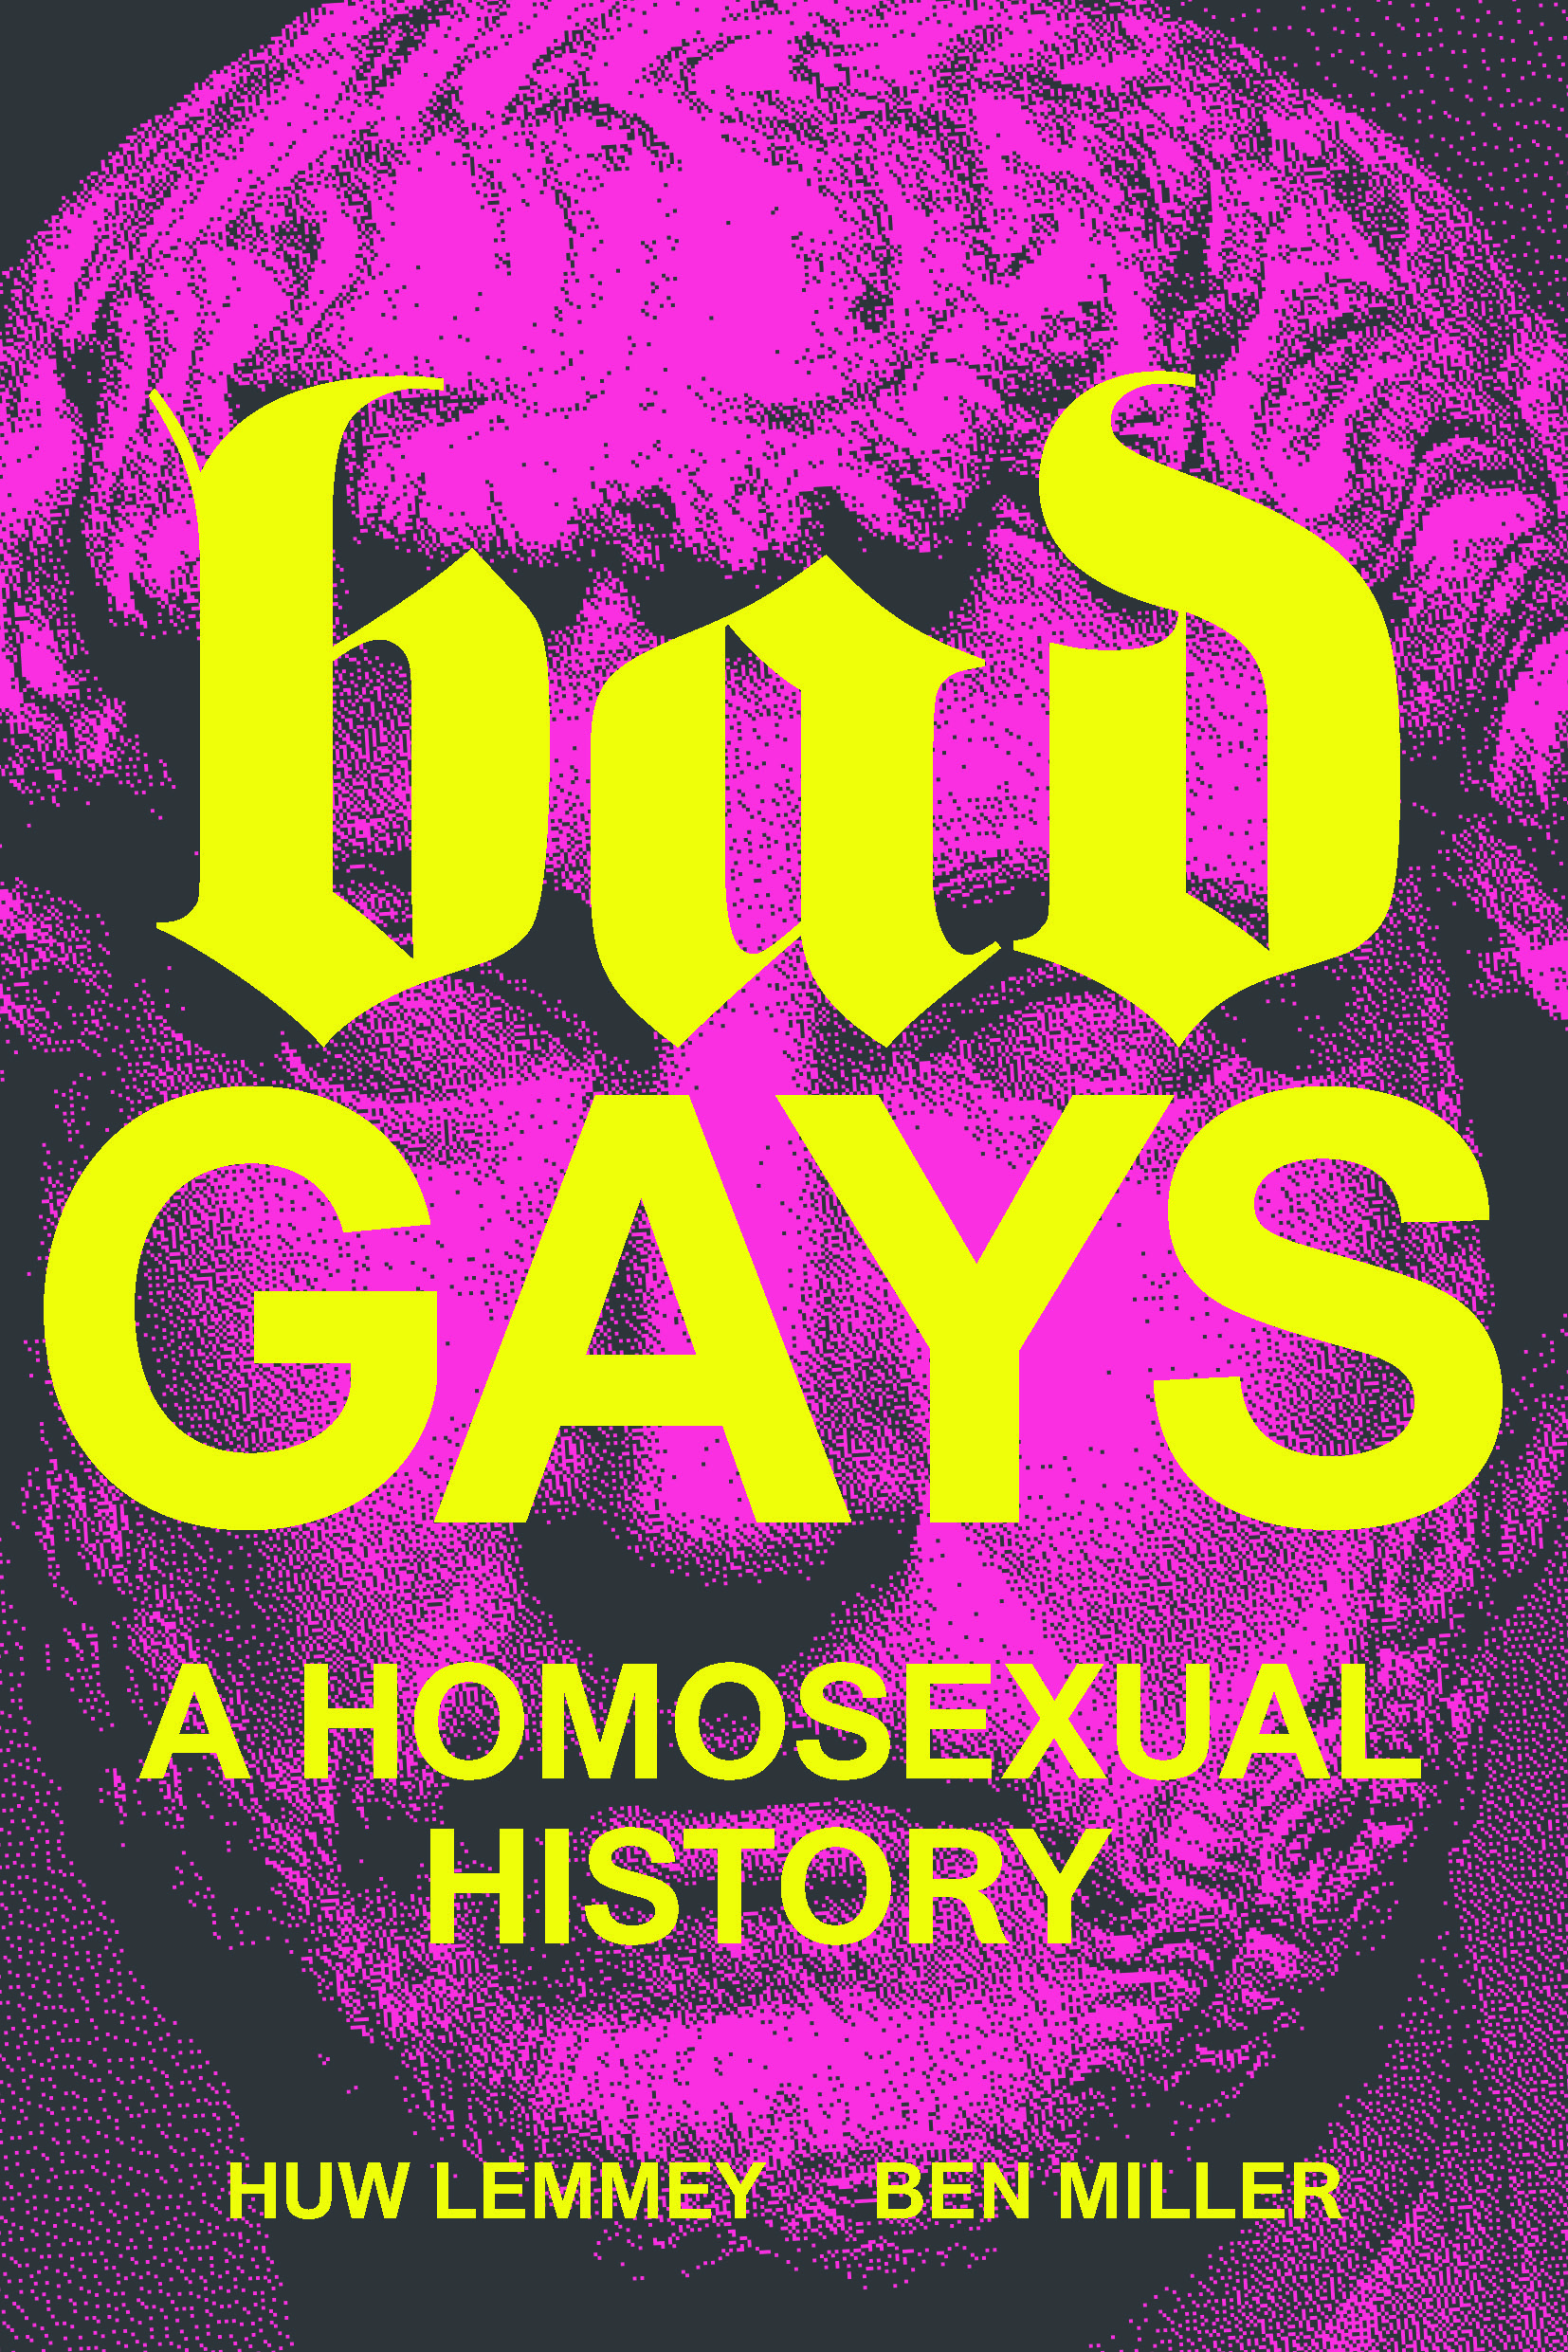 Bad Gays By Huw Lemmey